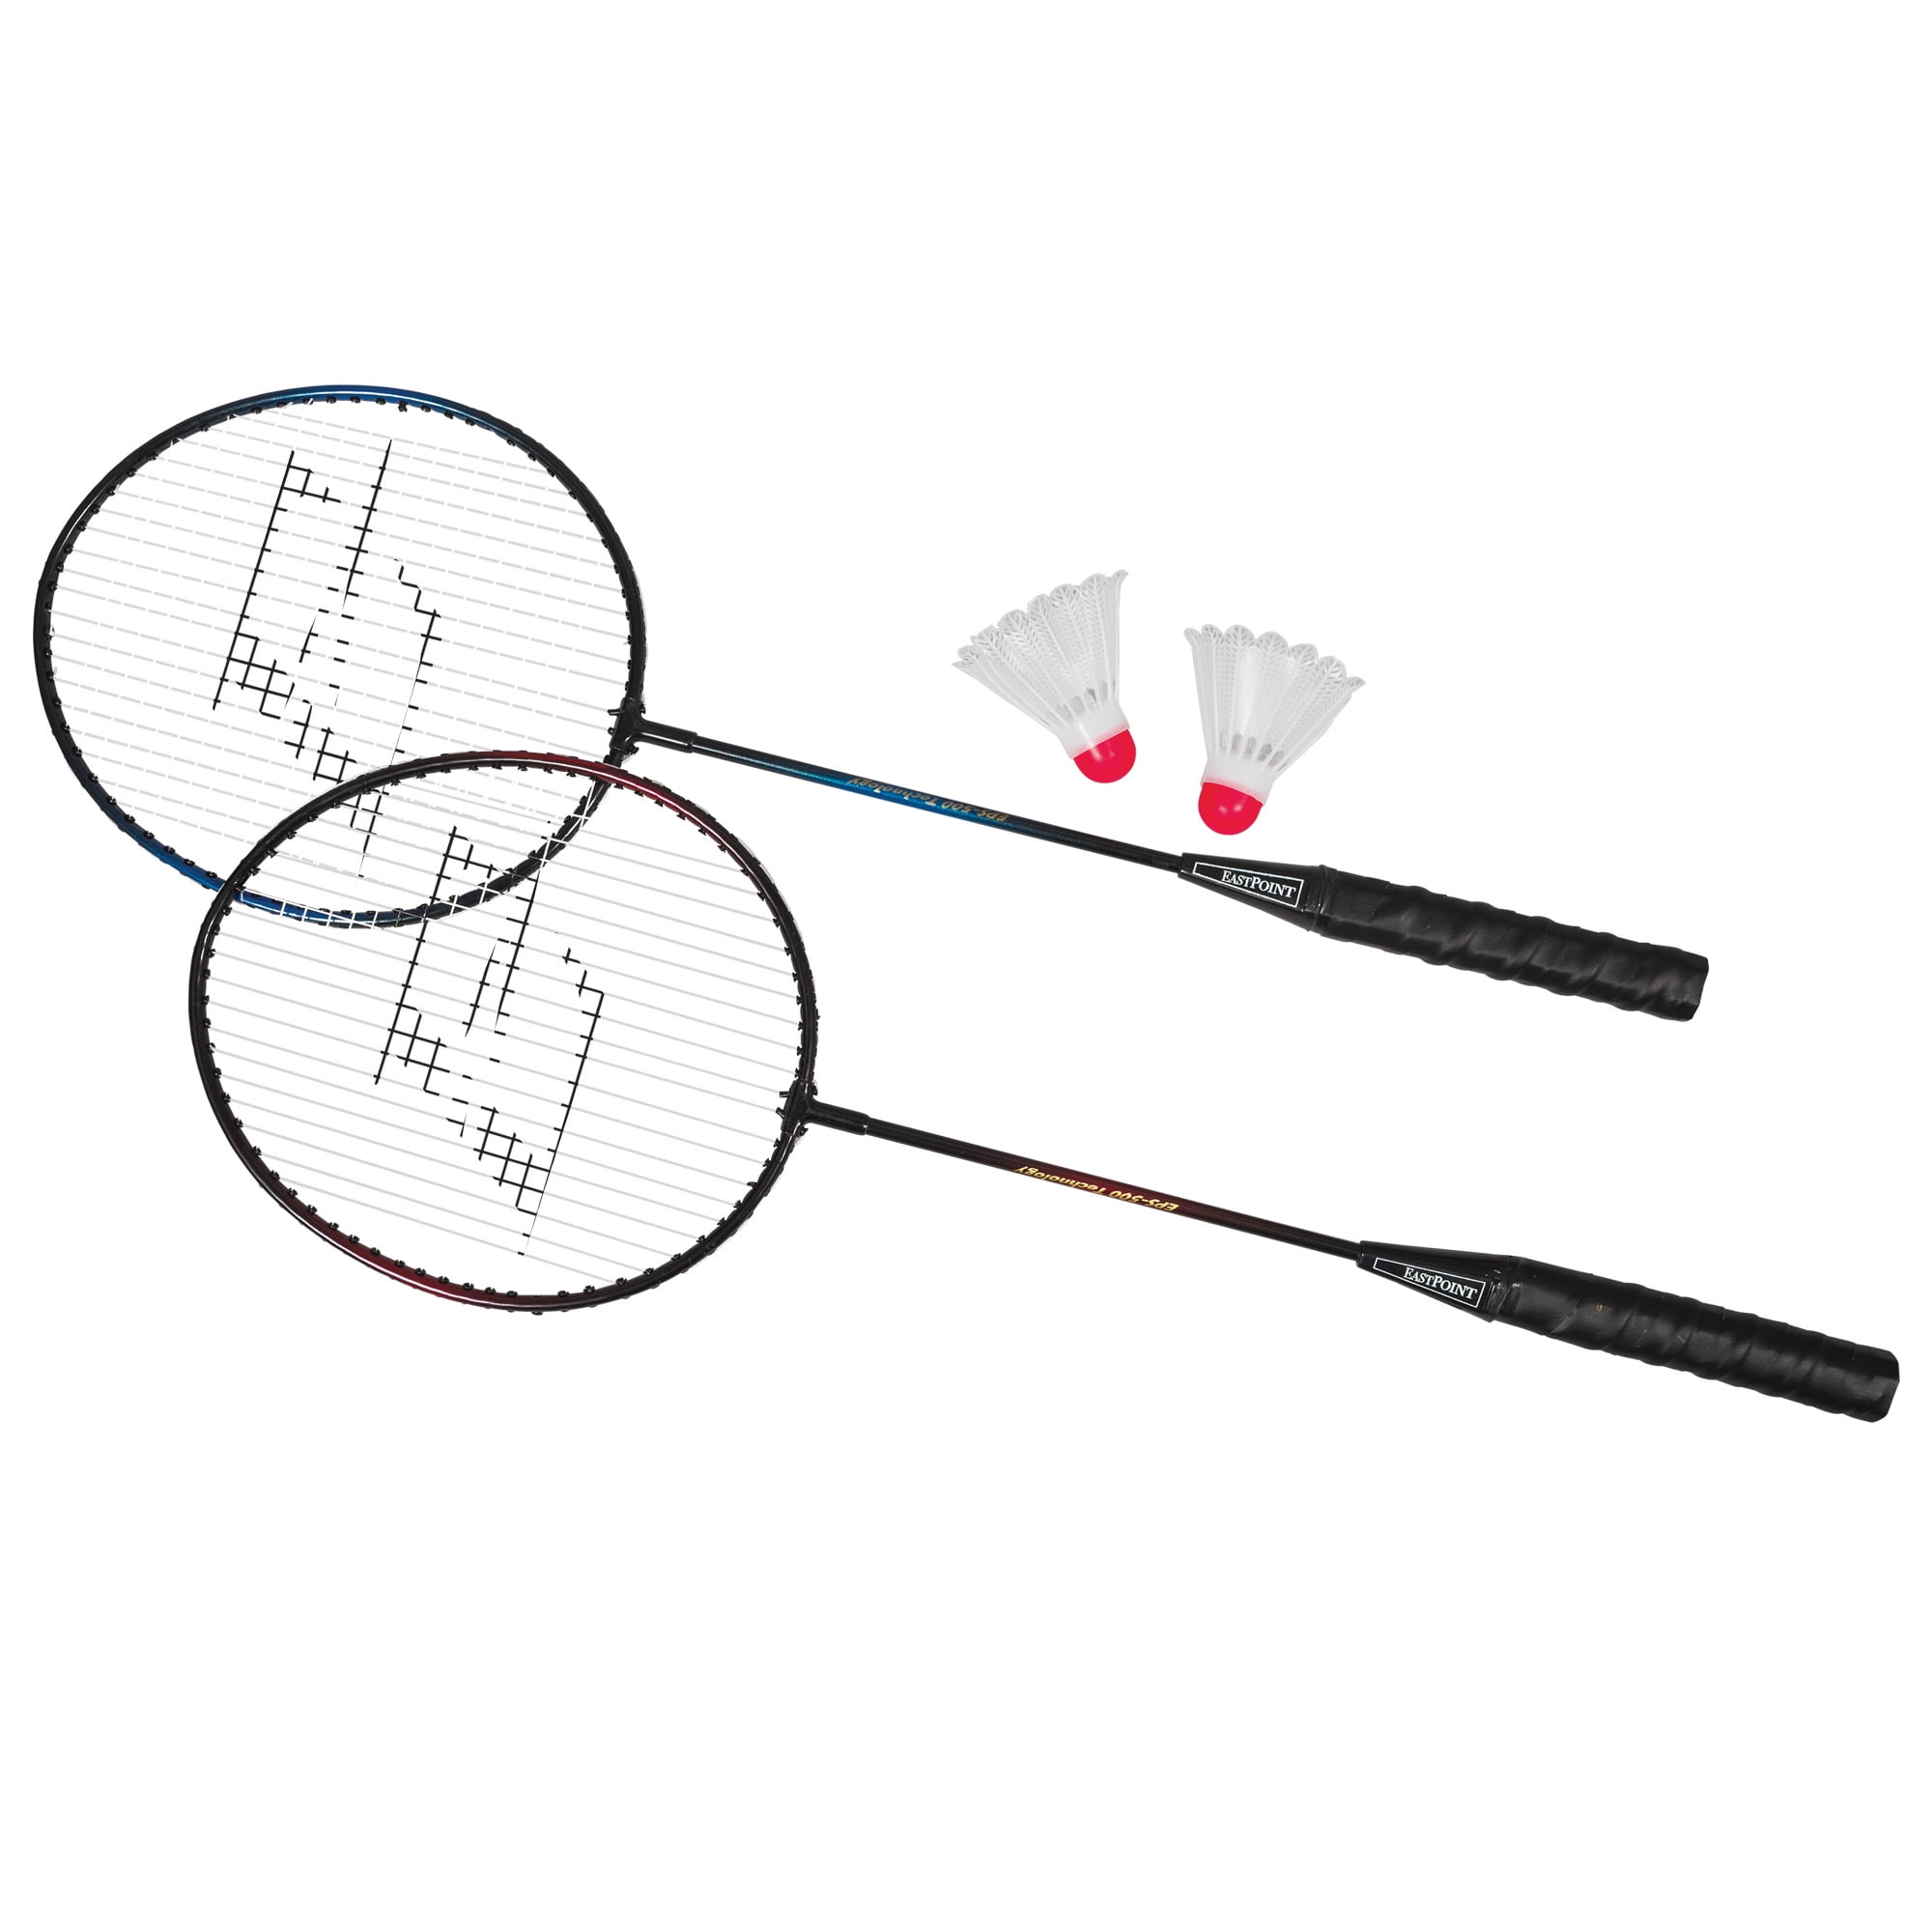 Portable,Anti Slip for Family Childrens Beginners Trainer Badminton Rackets Set CHRNG 2X Rocket with 1x Bag Badminton Set 